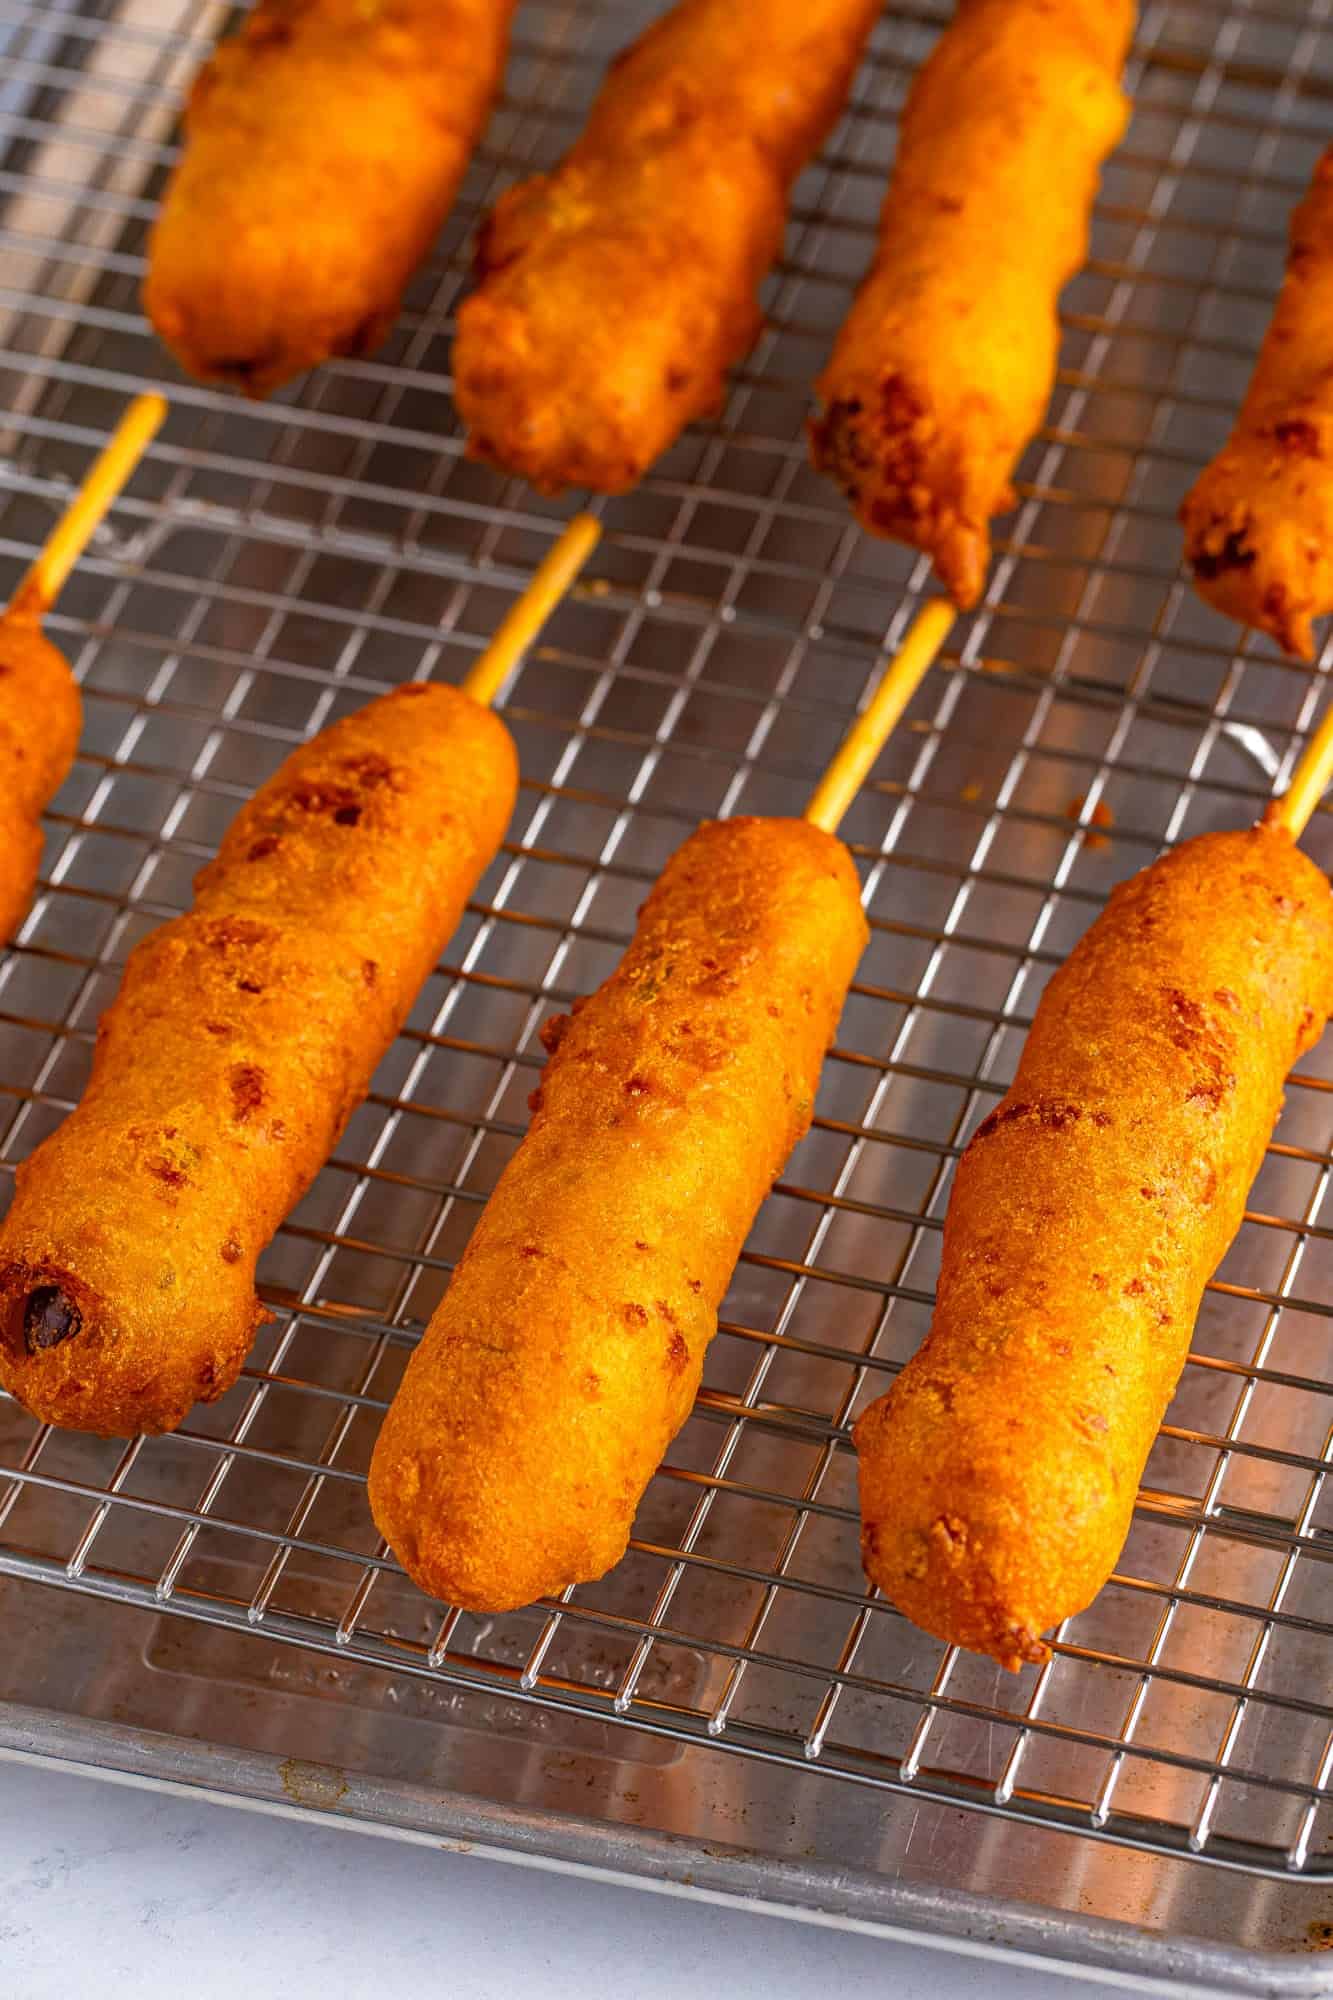 a wire rack holding fried homemade corn dogs over a sheet tray.